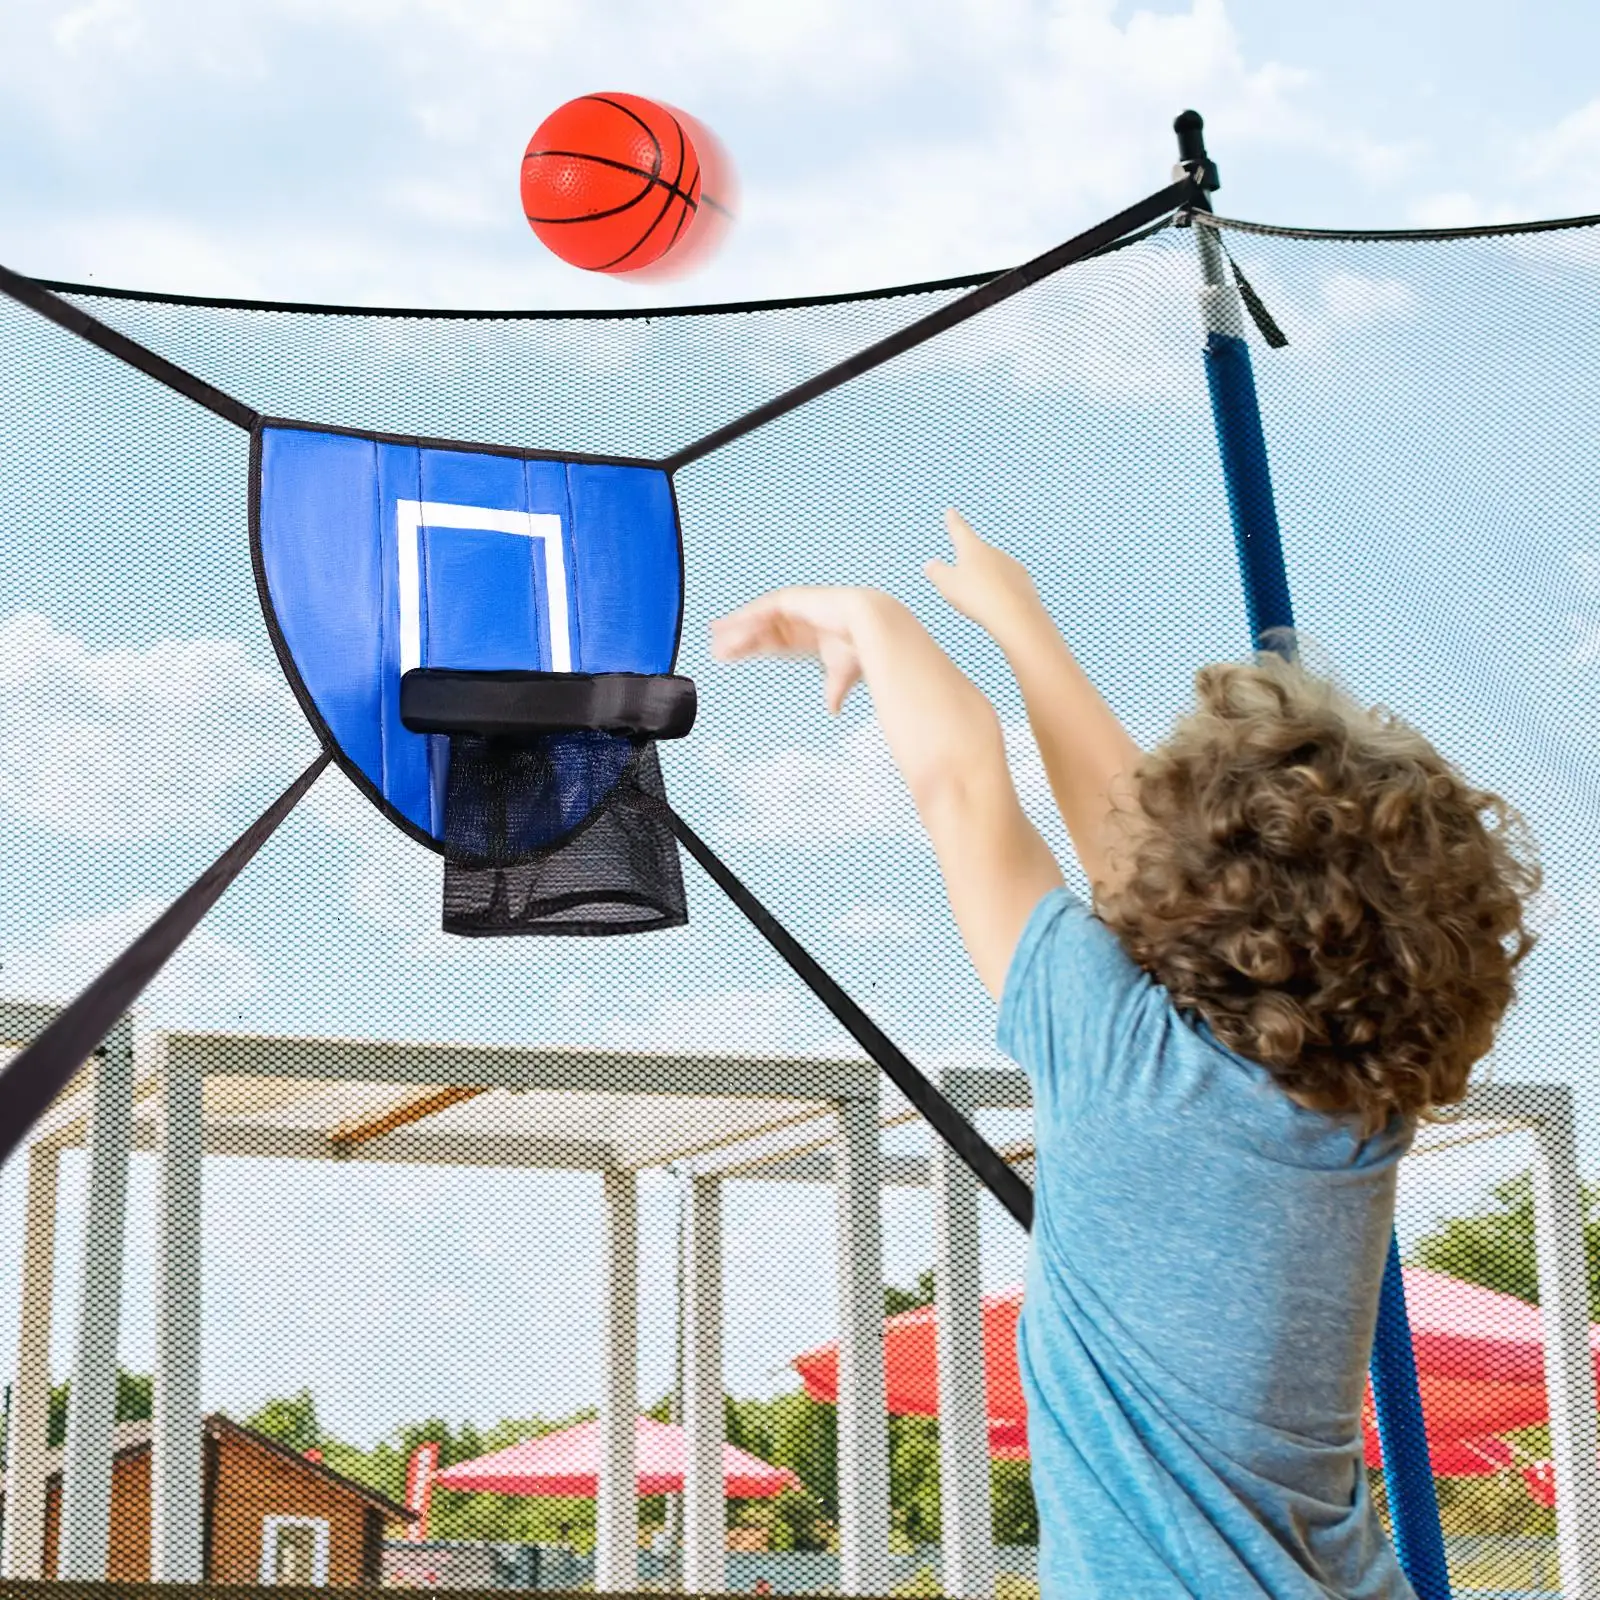 Mini Basketball Hoop for Trampoline with Enclosure Easy Install Sturdy Trampoline Accessory for All Ages for Kids Children